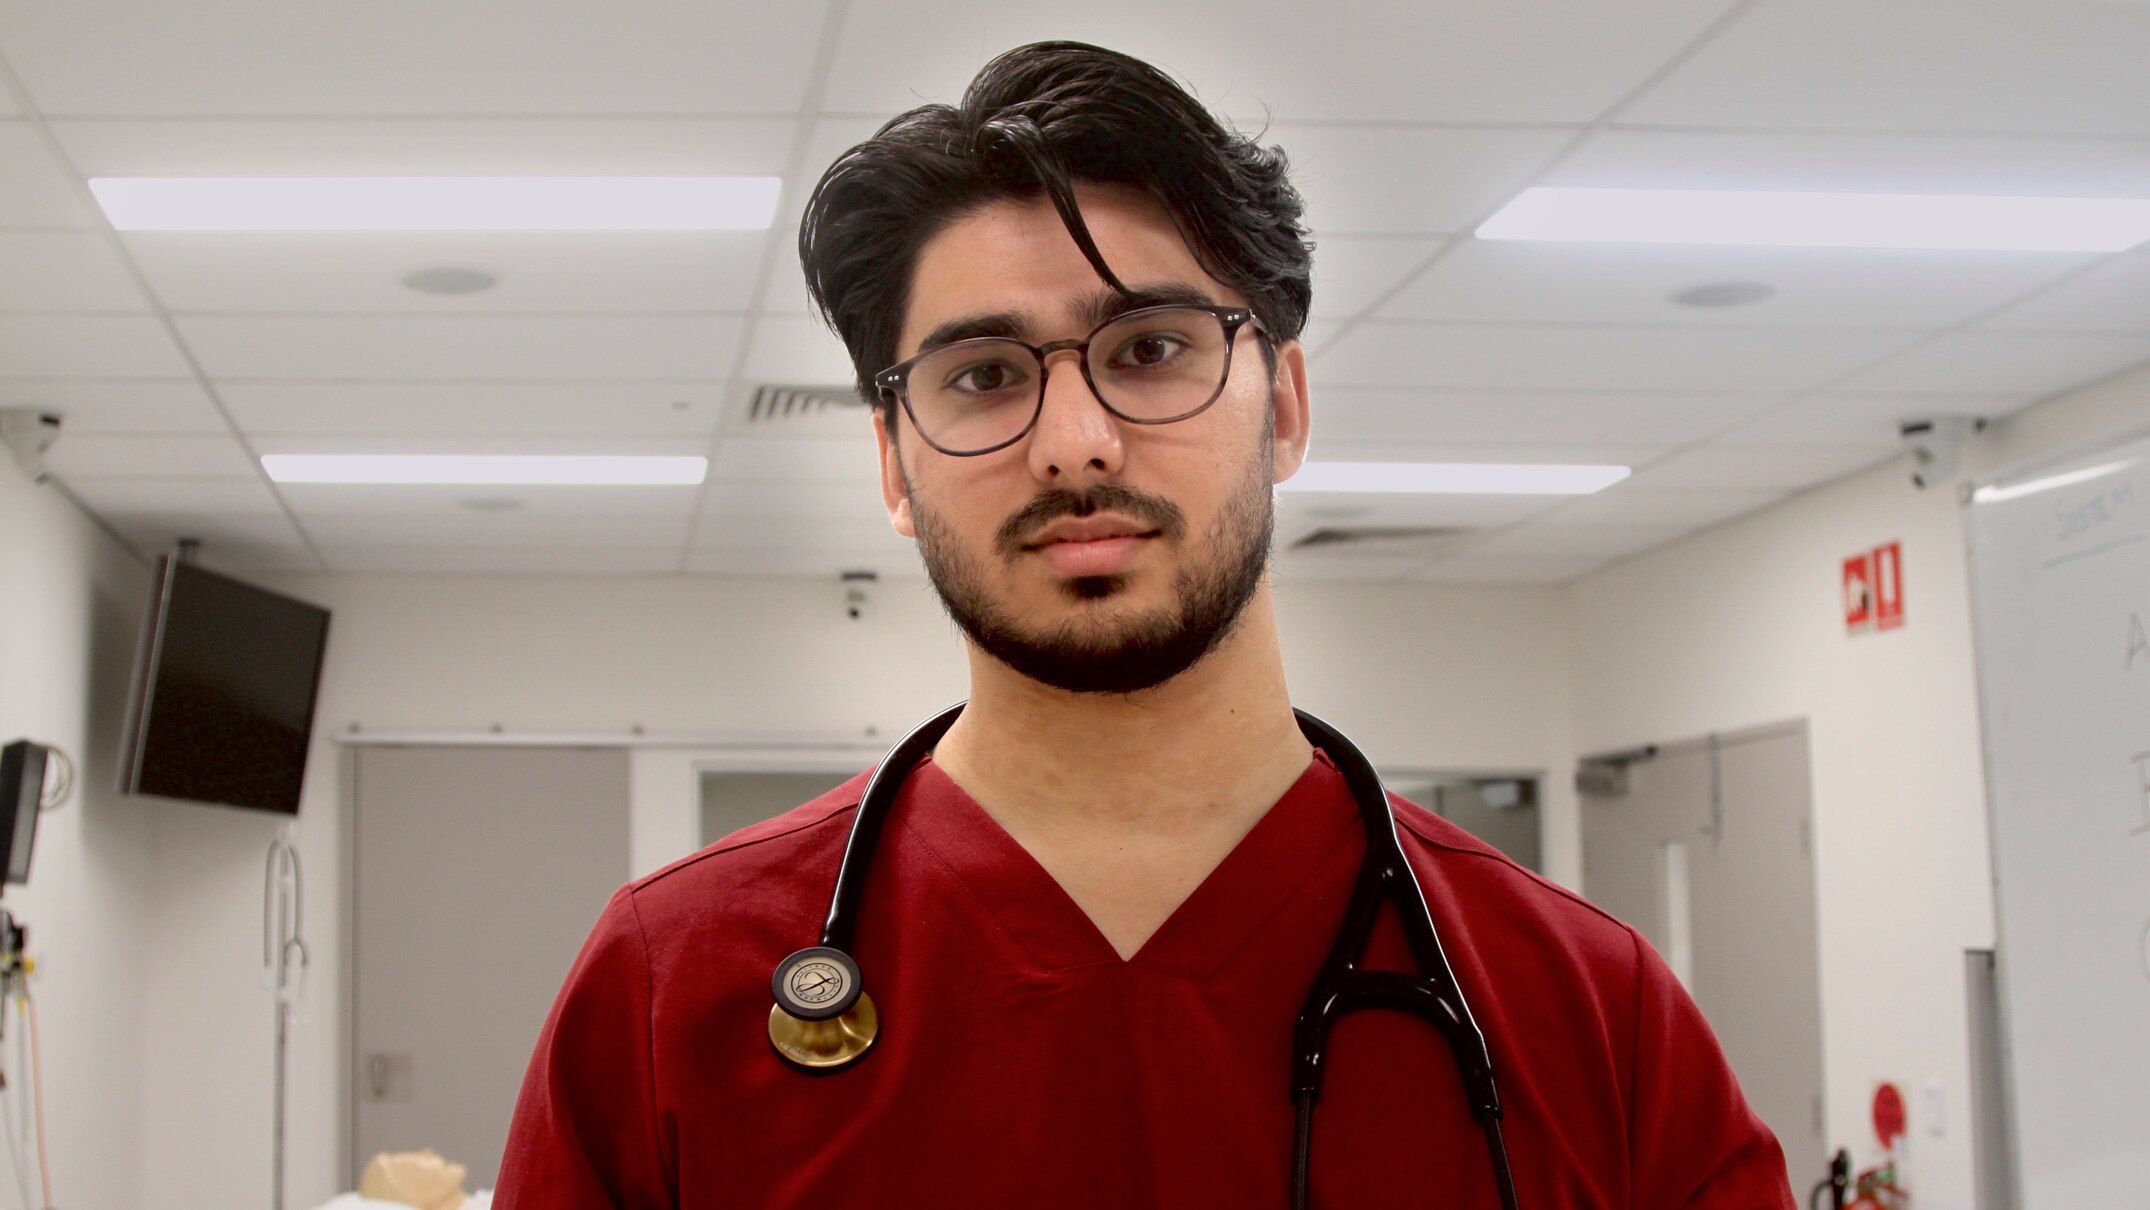 disadvantaged students fight to get into medicine degrees. one's calling it out on tiktok